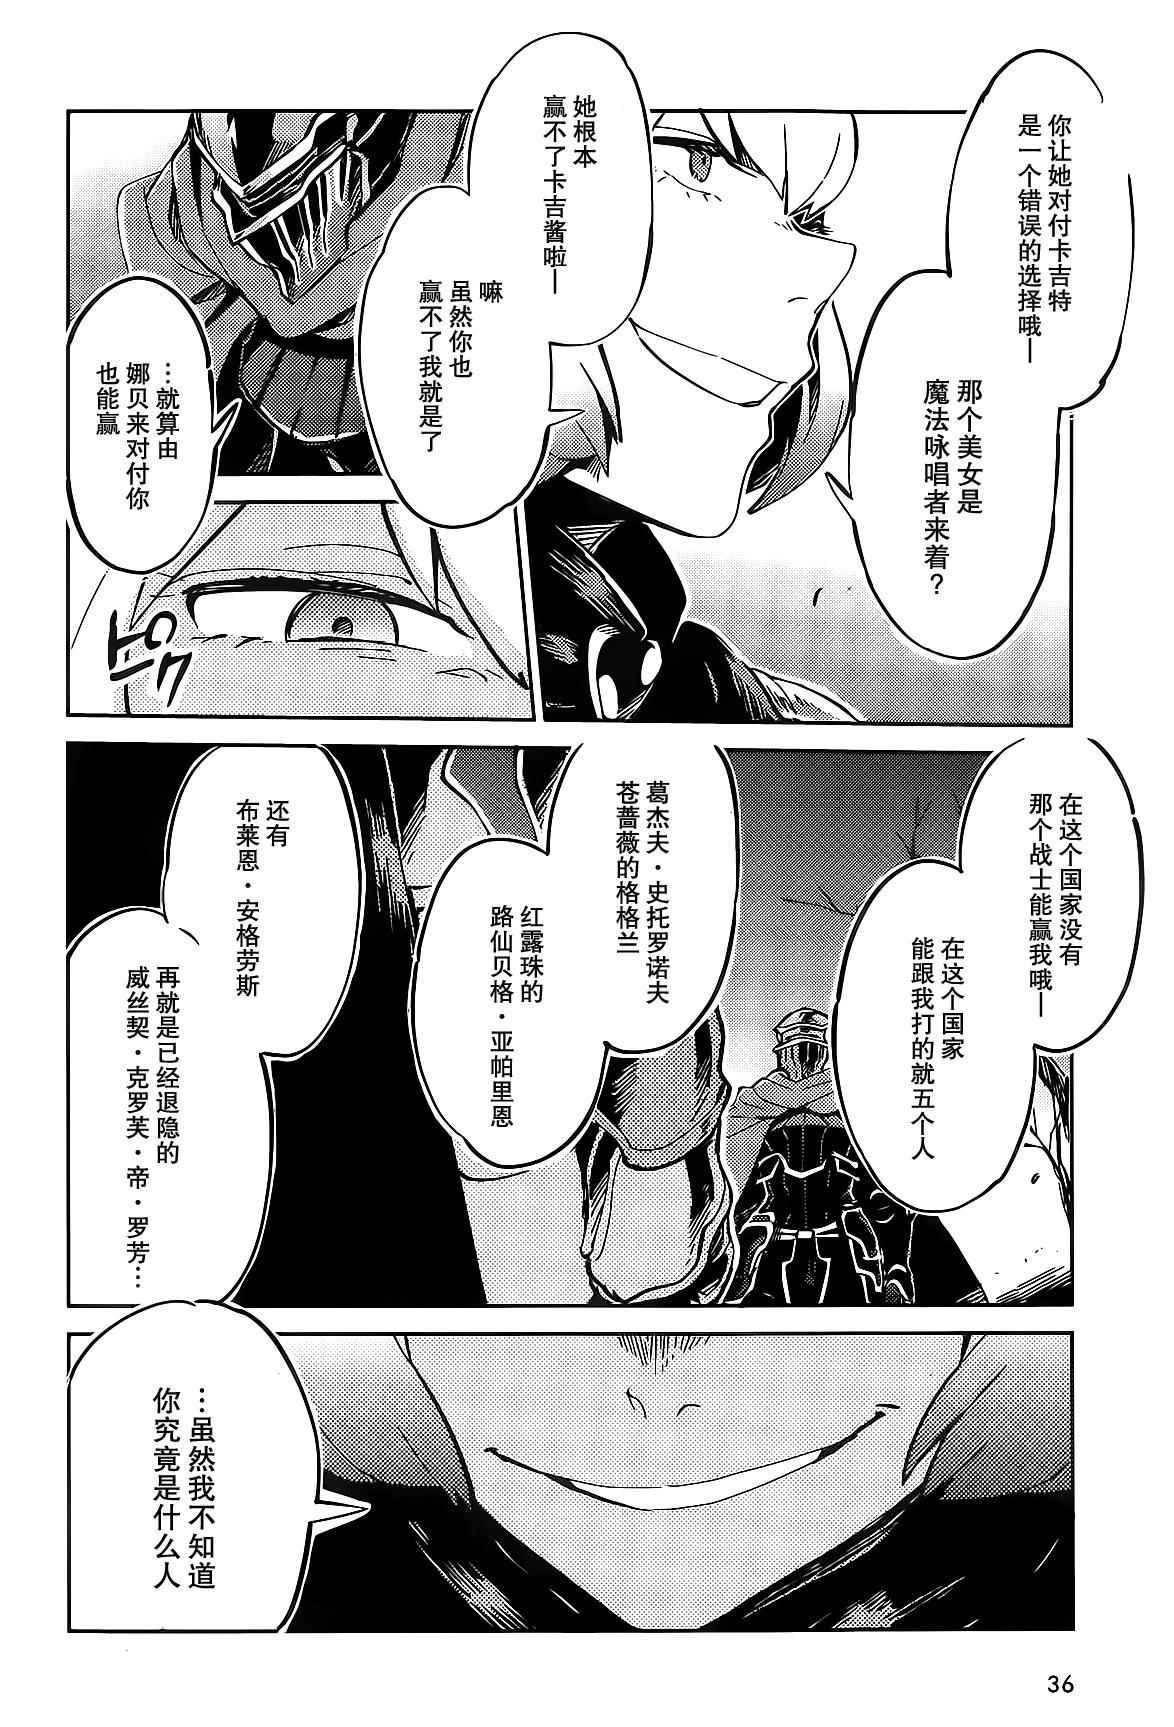 《OVERLORD》漫画 008话